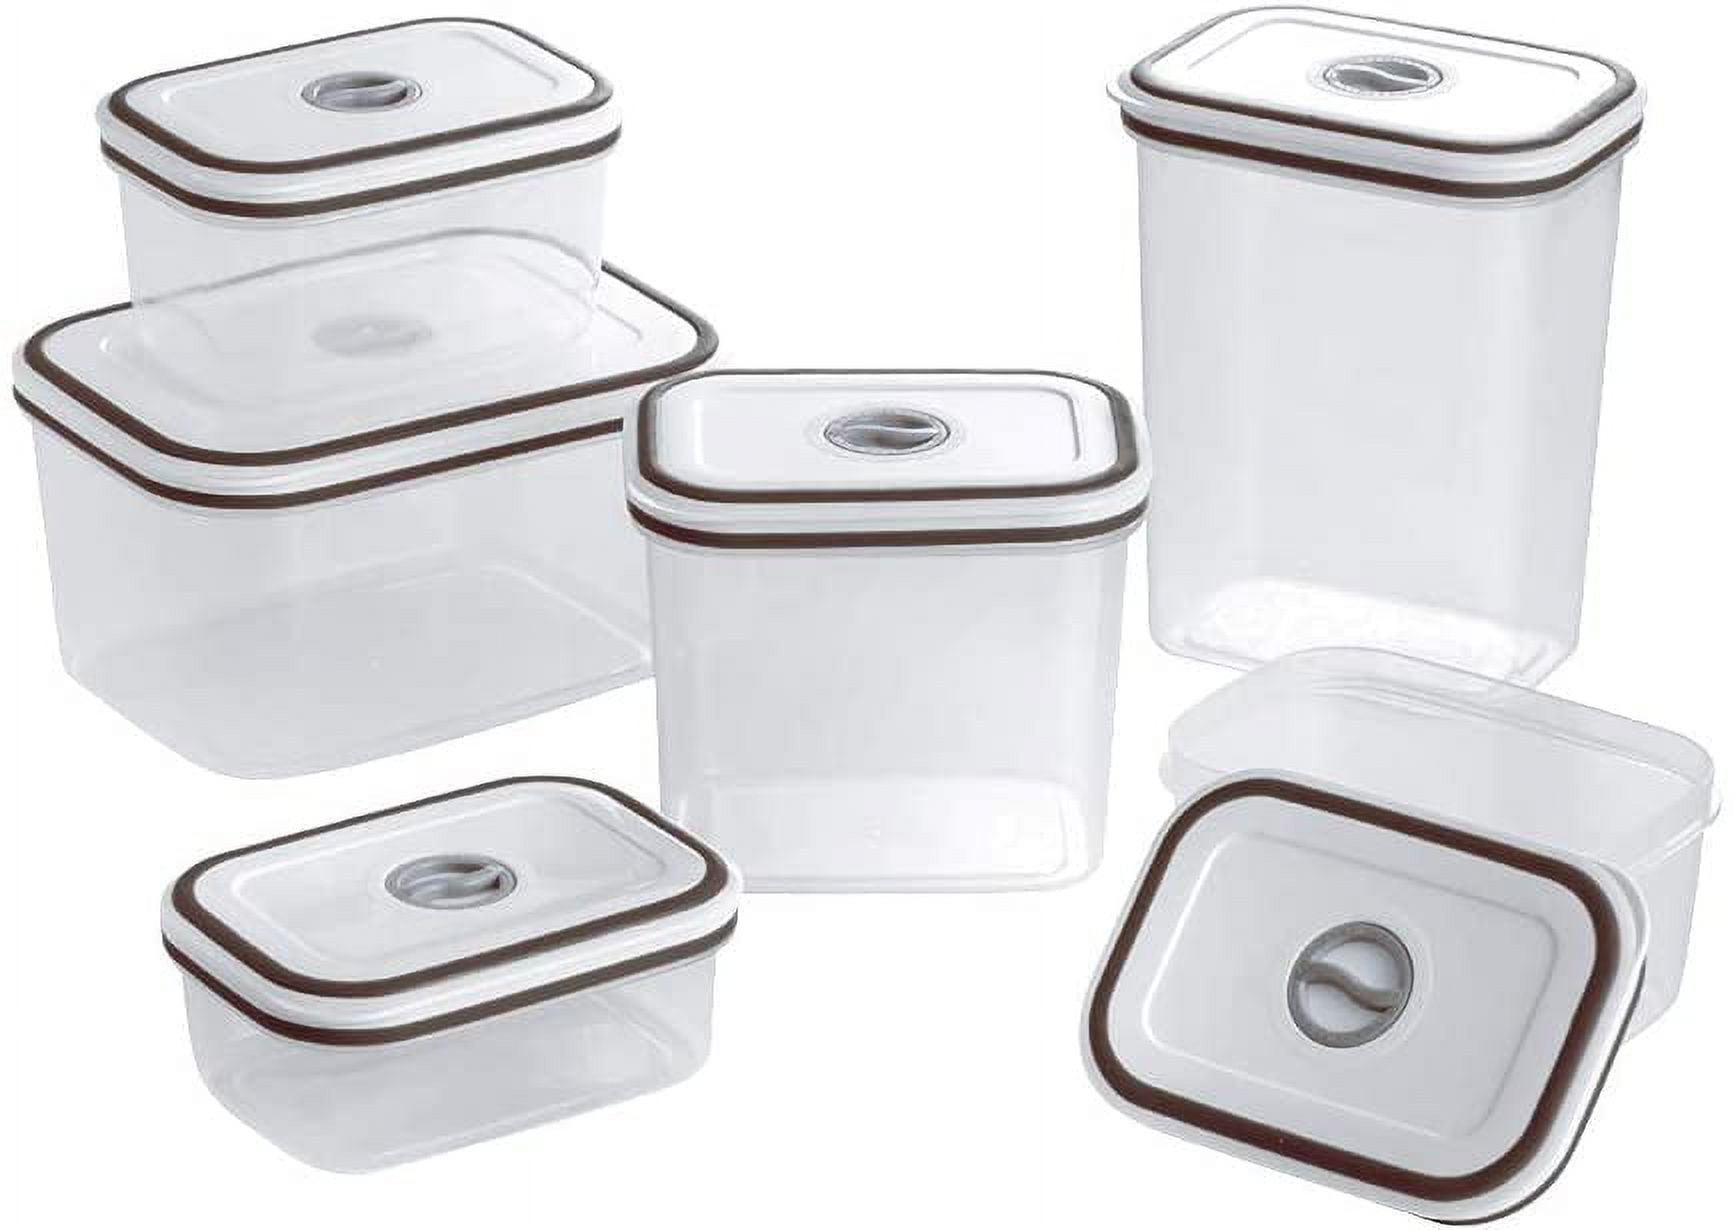 Hastings Home Multisize BPA-Free Food Storage Container in the